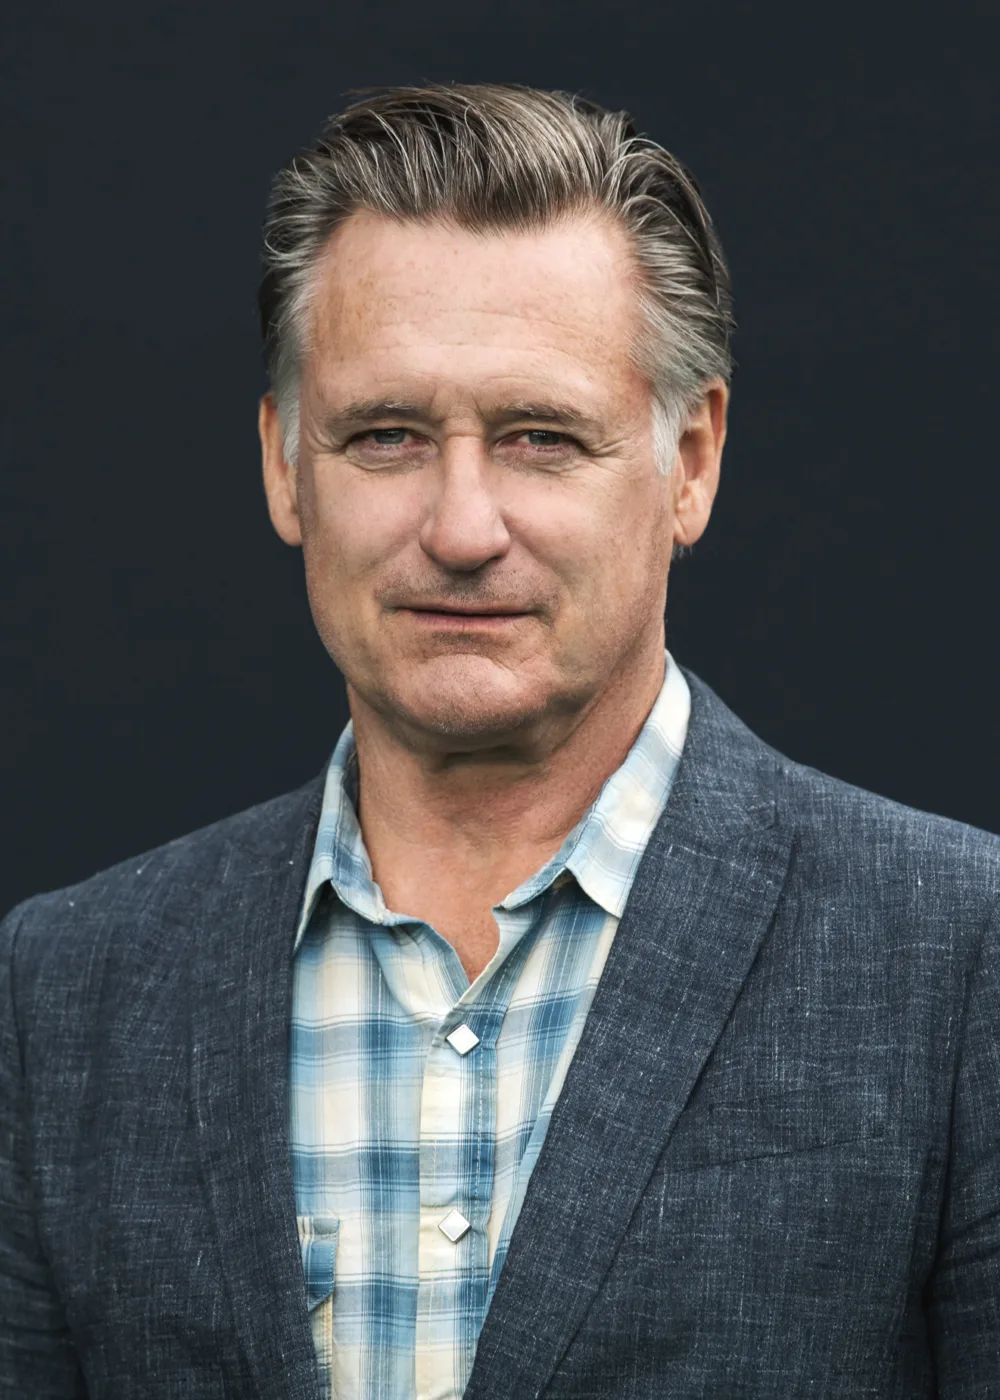 Bill Pullman is an American actor known for his work in film, television, and theater. Born on December 17, 1953, in Hornell, New York, Pullman began his career in the theater before making his way to Hollywood. Pullman has appeared in a wide range of films and television shows, including Spaceballs, Independence Day, While You Were Sleeping, and The Sinner, for which he received critical acclaim and a Primetime Emmy nomination. He has also appeared on Broadway in plays such as The Goat, or Who Is Sylvia? and Oleanna. With his talent, versatility, and dedication to his craft, Pullman has become a respected and influential figure in American entertainment, inspiring audiences with his performances both on stage and on screen.